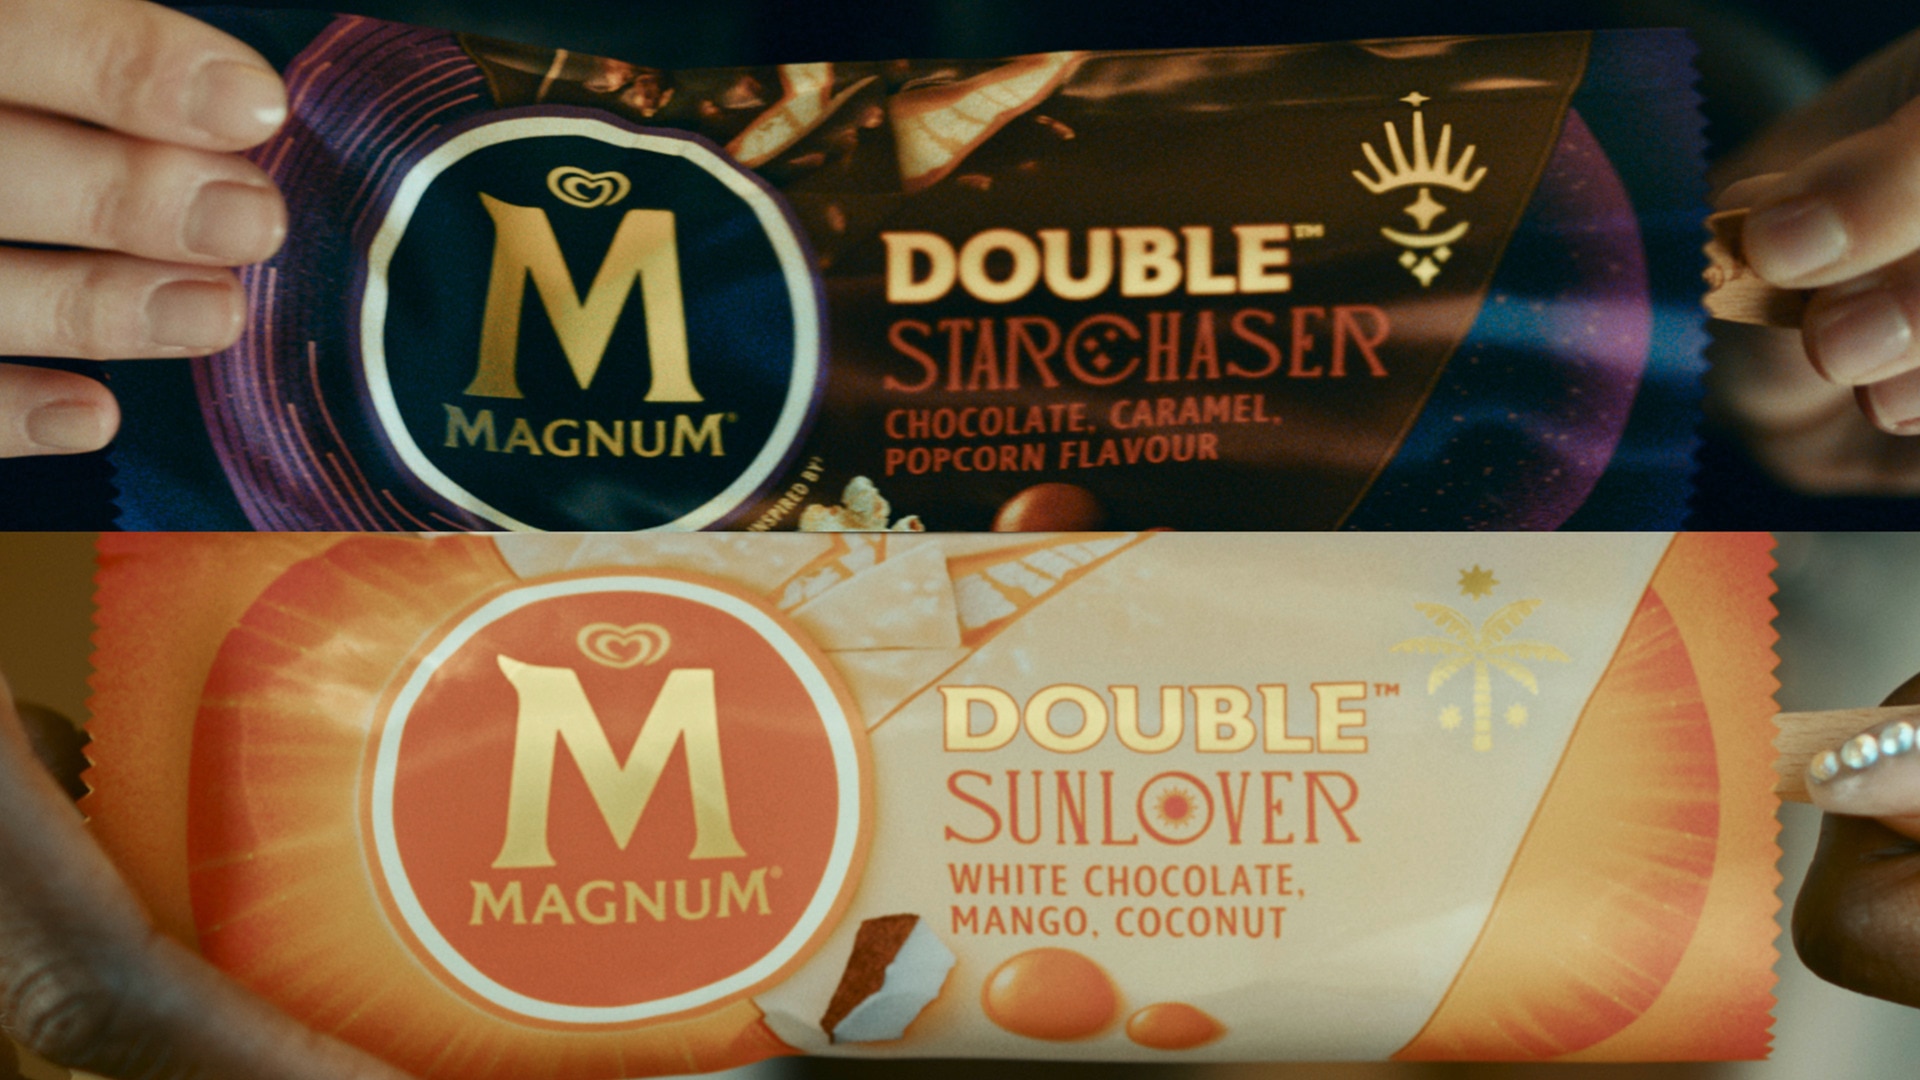 Magnum Double Starchaser and Sunlover 60 seconds commercial